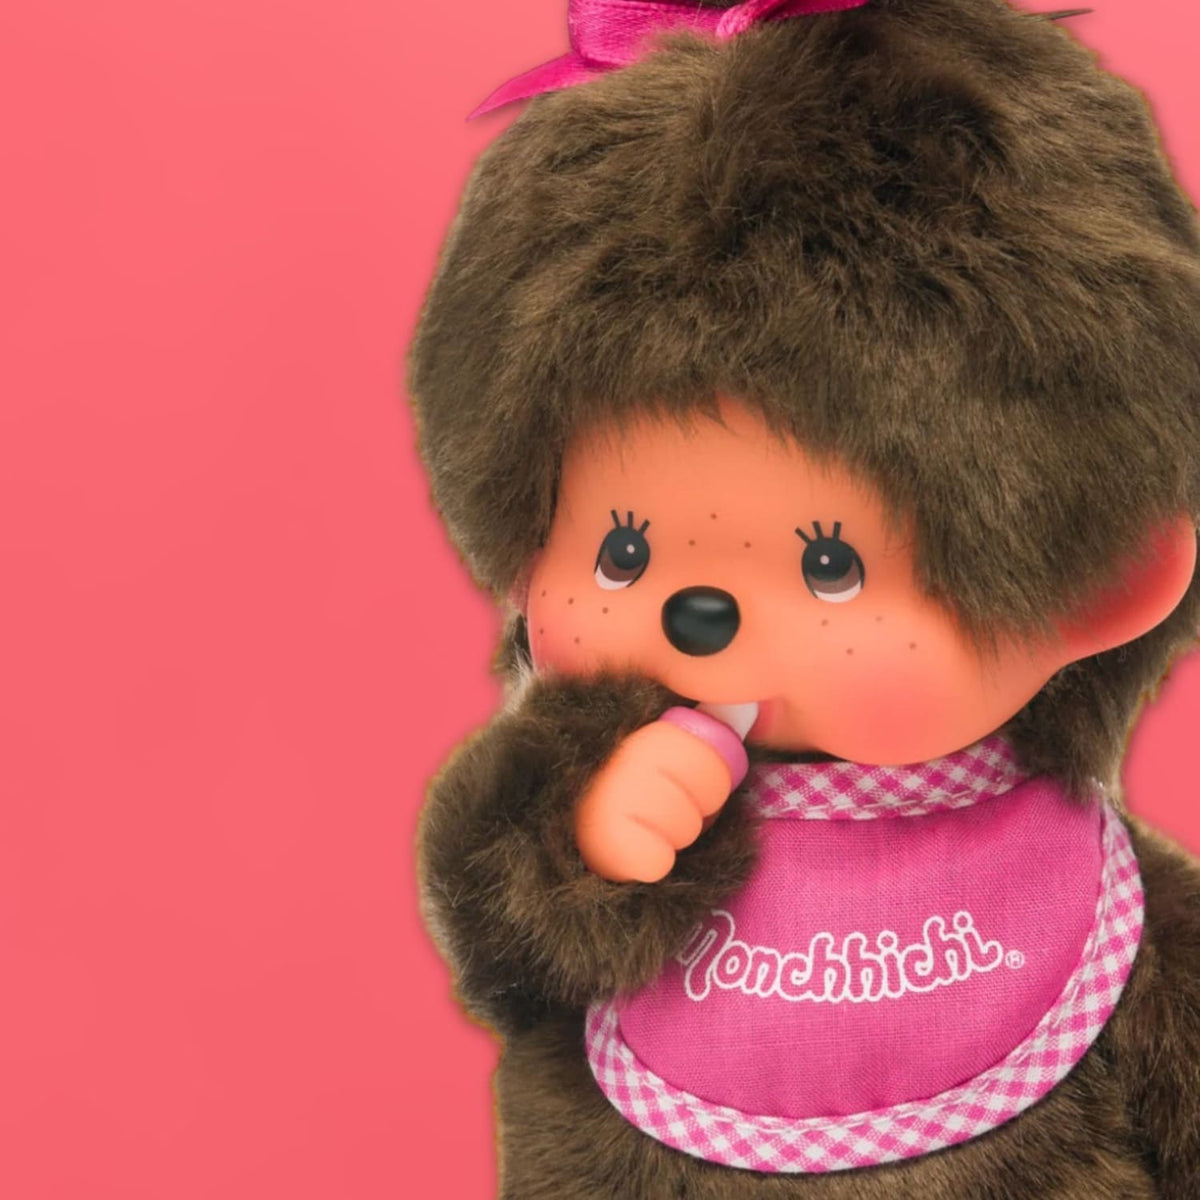 Monchhichi Doll - Classic Girl Classic Girl - Collectible -